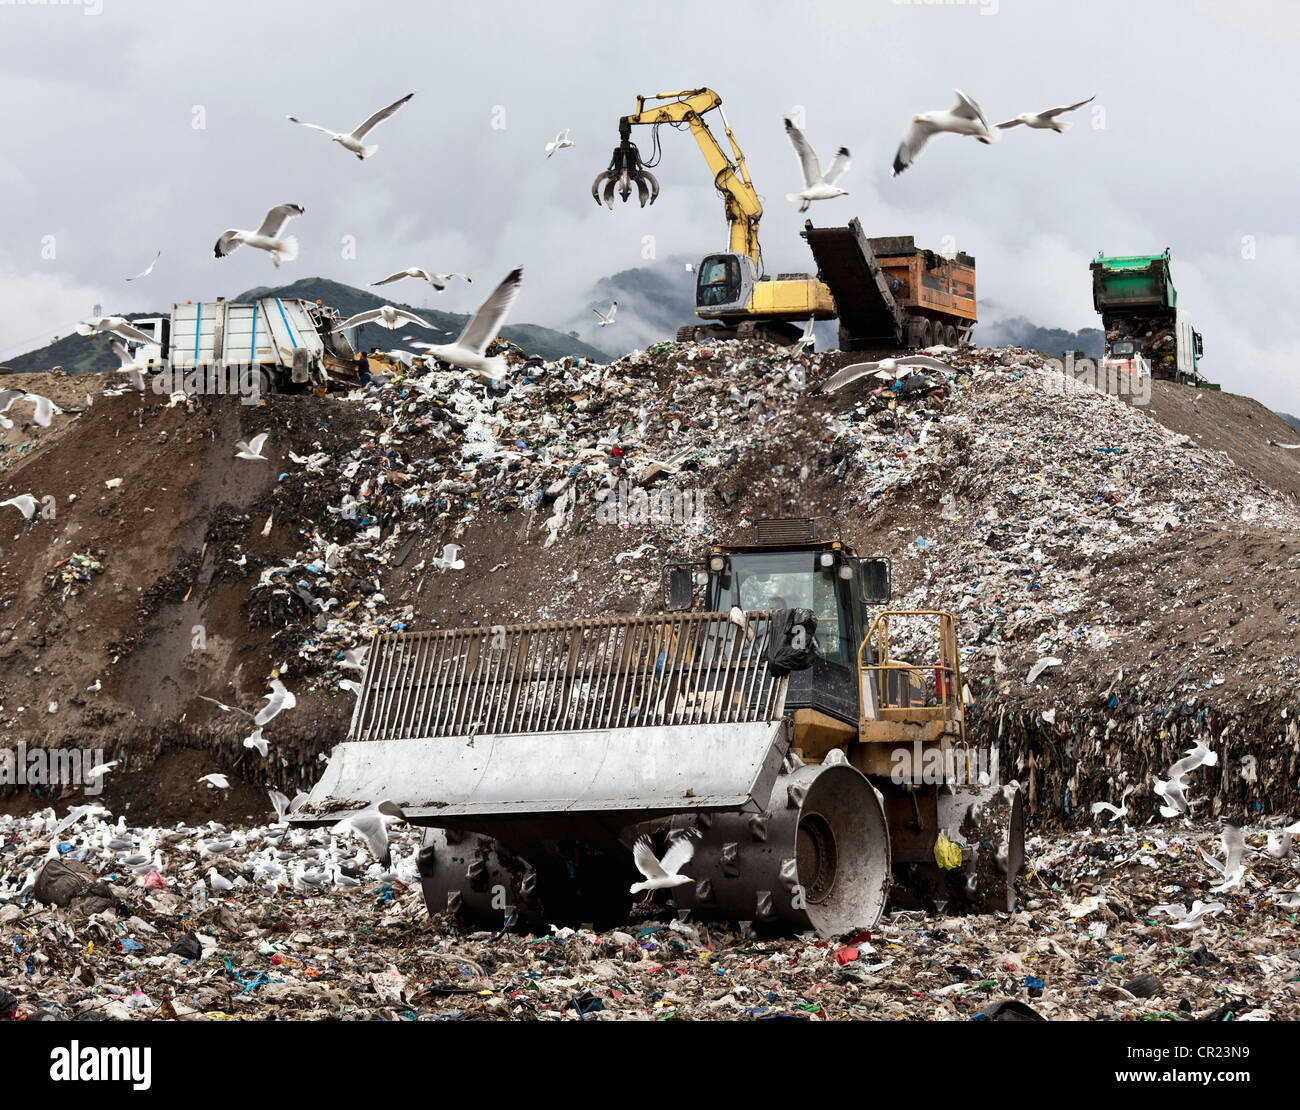 Birds circling garbage collection center Stock Photo